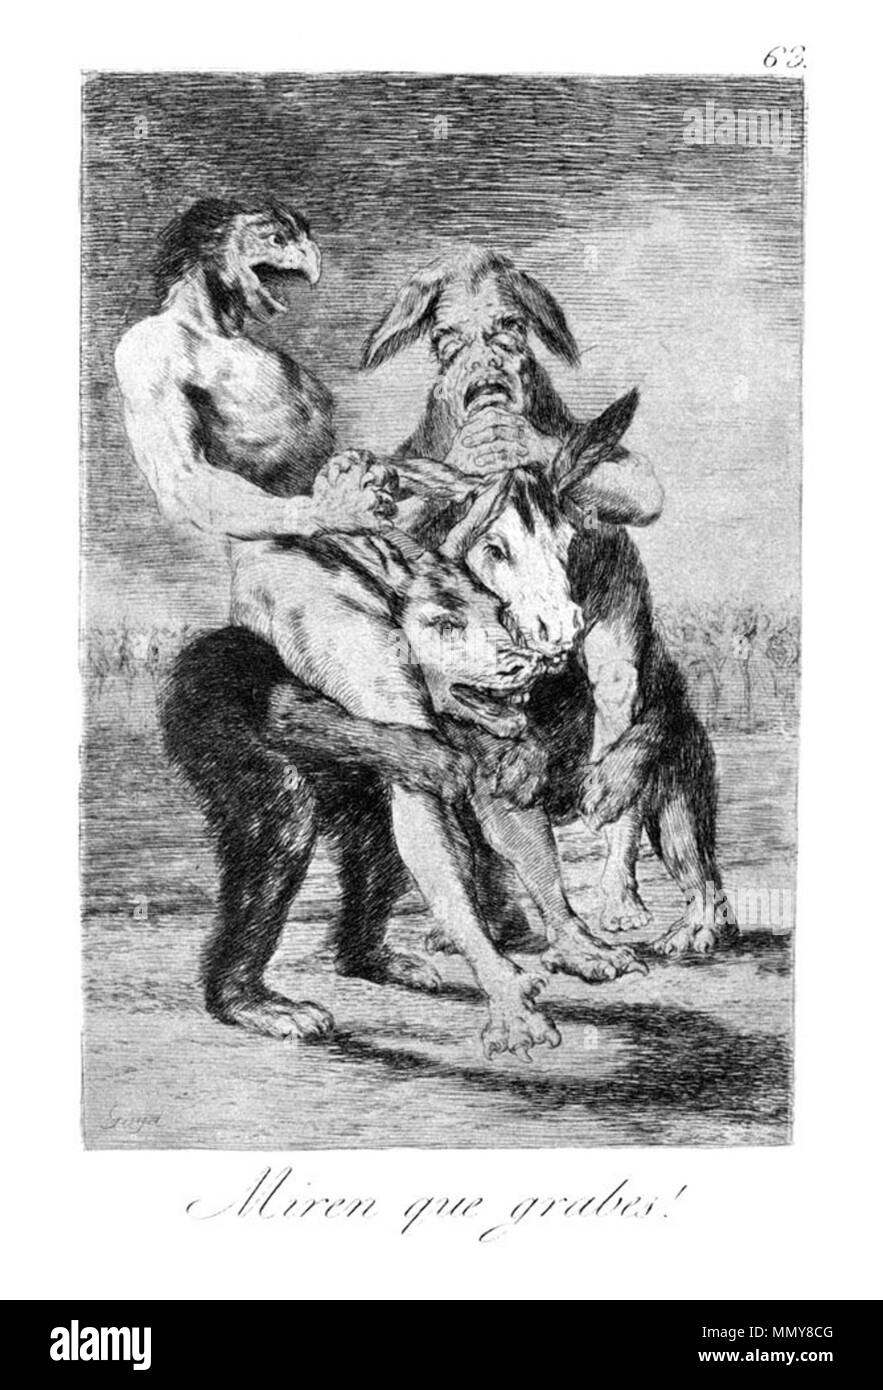 . Los Caprichos is a set of 80 aquatint prints created by Francisco Goya for release in 1799.  . 1799.   Francisco Goya  (1746–1828)      Alternative names Francisco Goya Lucientes, Francisco de Goya y Lucientes, Francisco José Goya Lucientes  Description Spanish painter, printmaker, lithographer, engraver and etcher  Date of birth/death 30 March 1746 16 April 1828  Location of birth/death Fuendetodos Bordeaux  Work location Madrid, Zaragoza, Bordeaux  Authority control  : Q5432 VIAF:?54343141 ISNI:?0000 0001 2280 1608 ULAN:?500118936 LCCN:?n79003363 NLA:?36545788 WorldCat Goya - Caprichos (63 Stock Photo